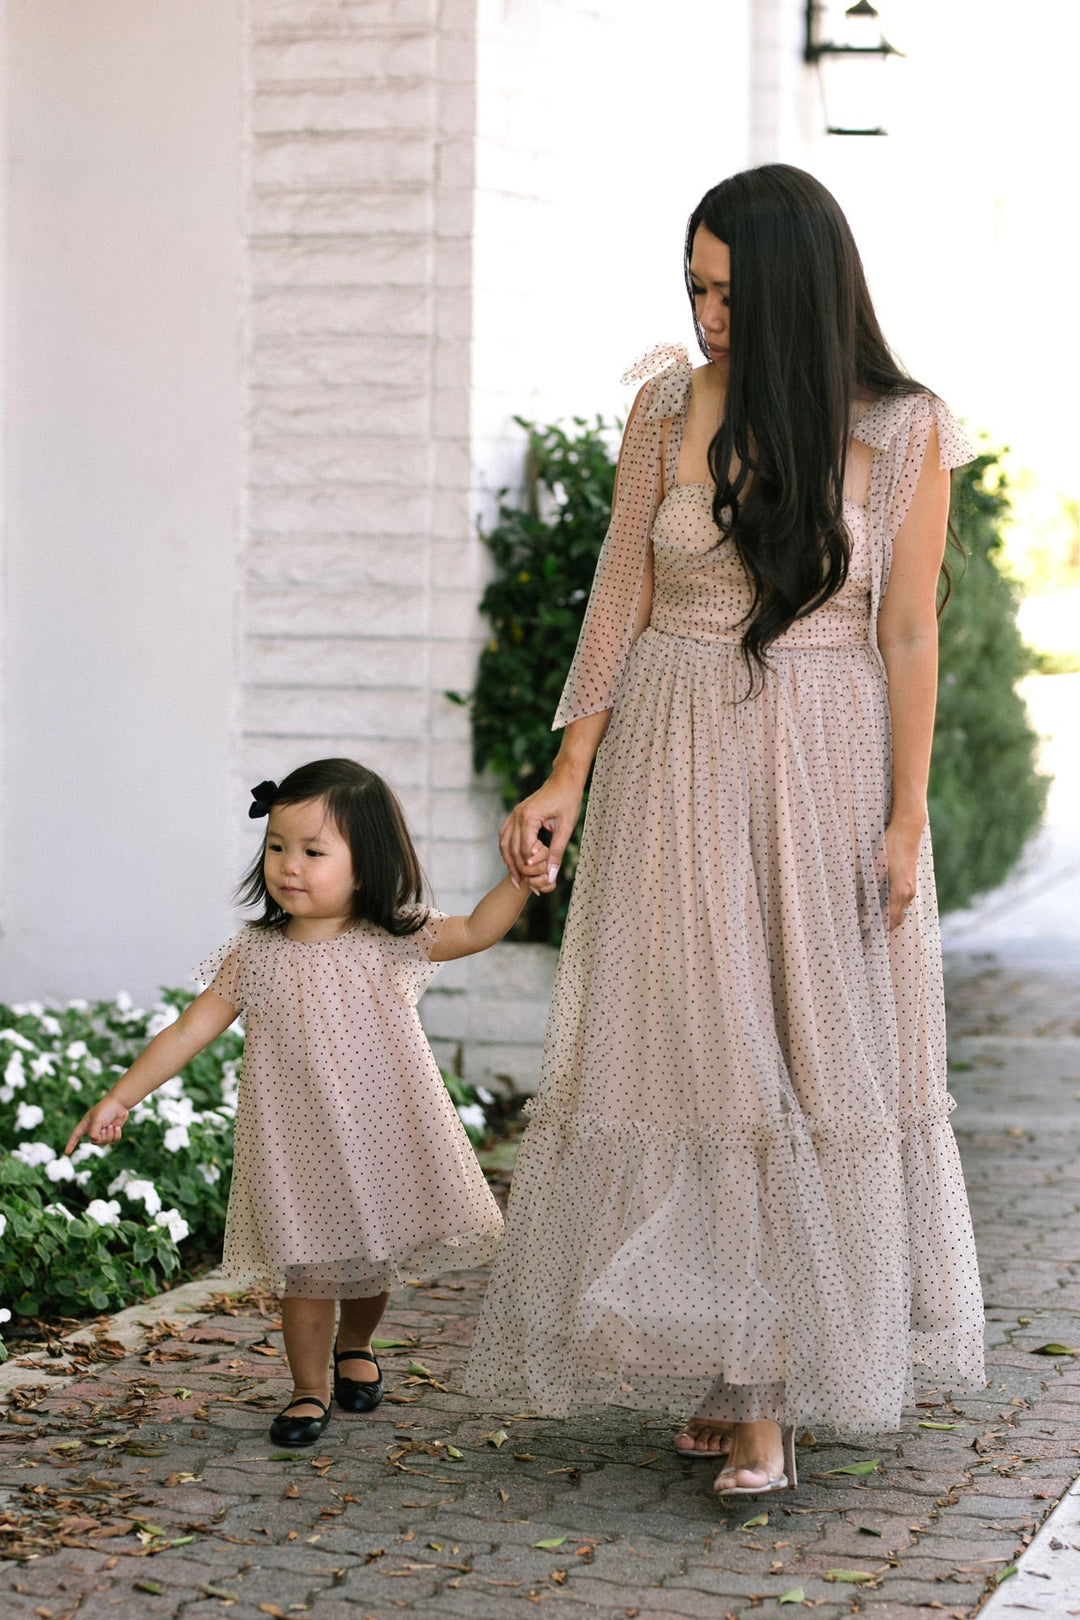 Nadia Dotted Tulle Maxi Dress - Morning Lavender Boutique Dresses